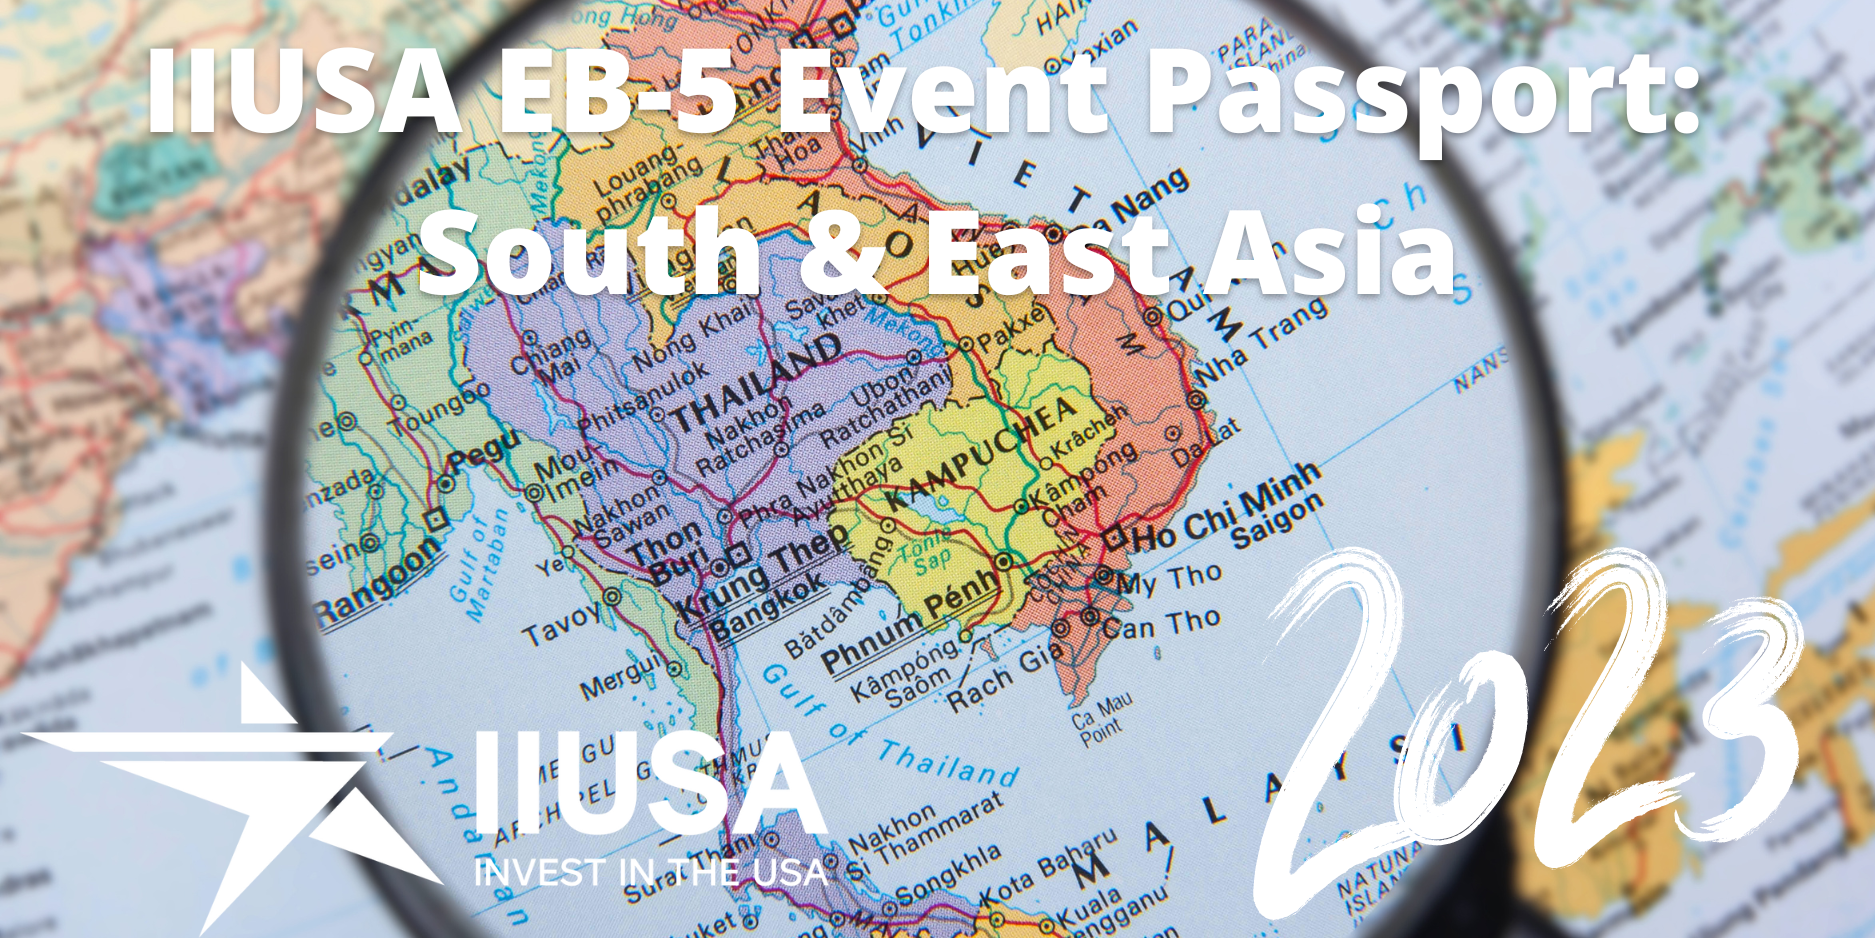 Time is running out to Register for the IIUSA EB-5 Event Passport Series – Asia